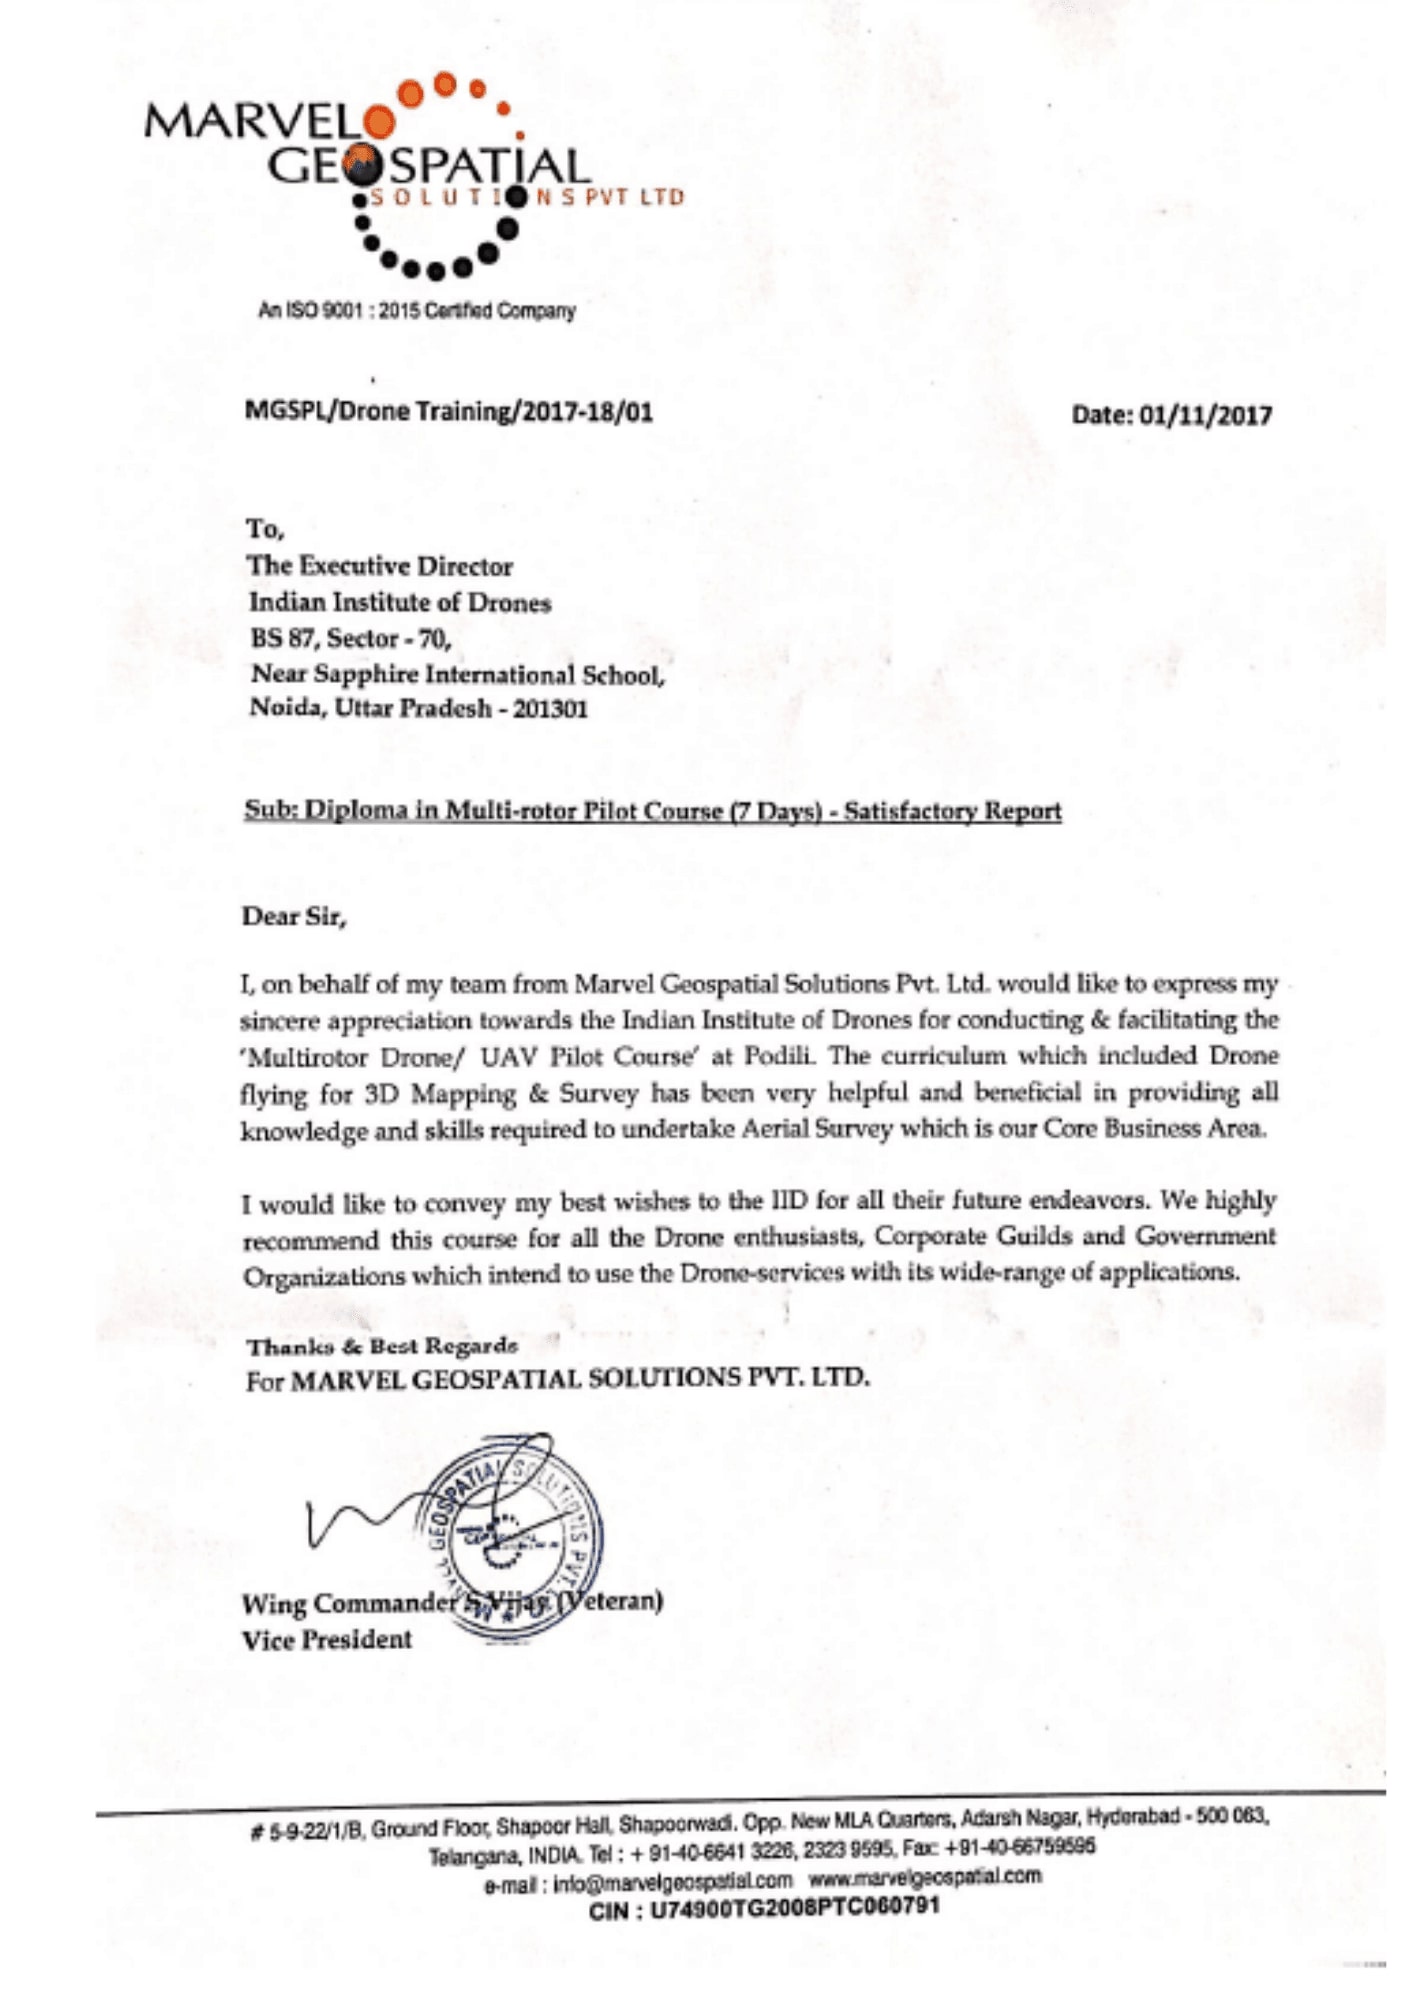 Satisfactory Letter from Geospatial Solutions